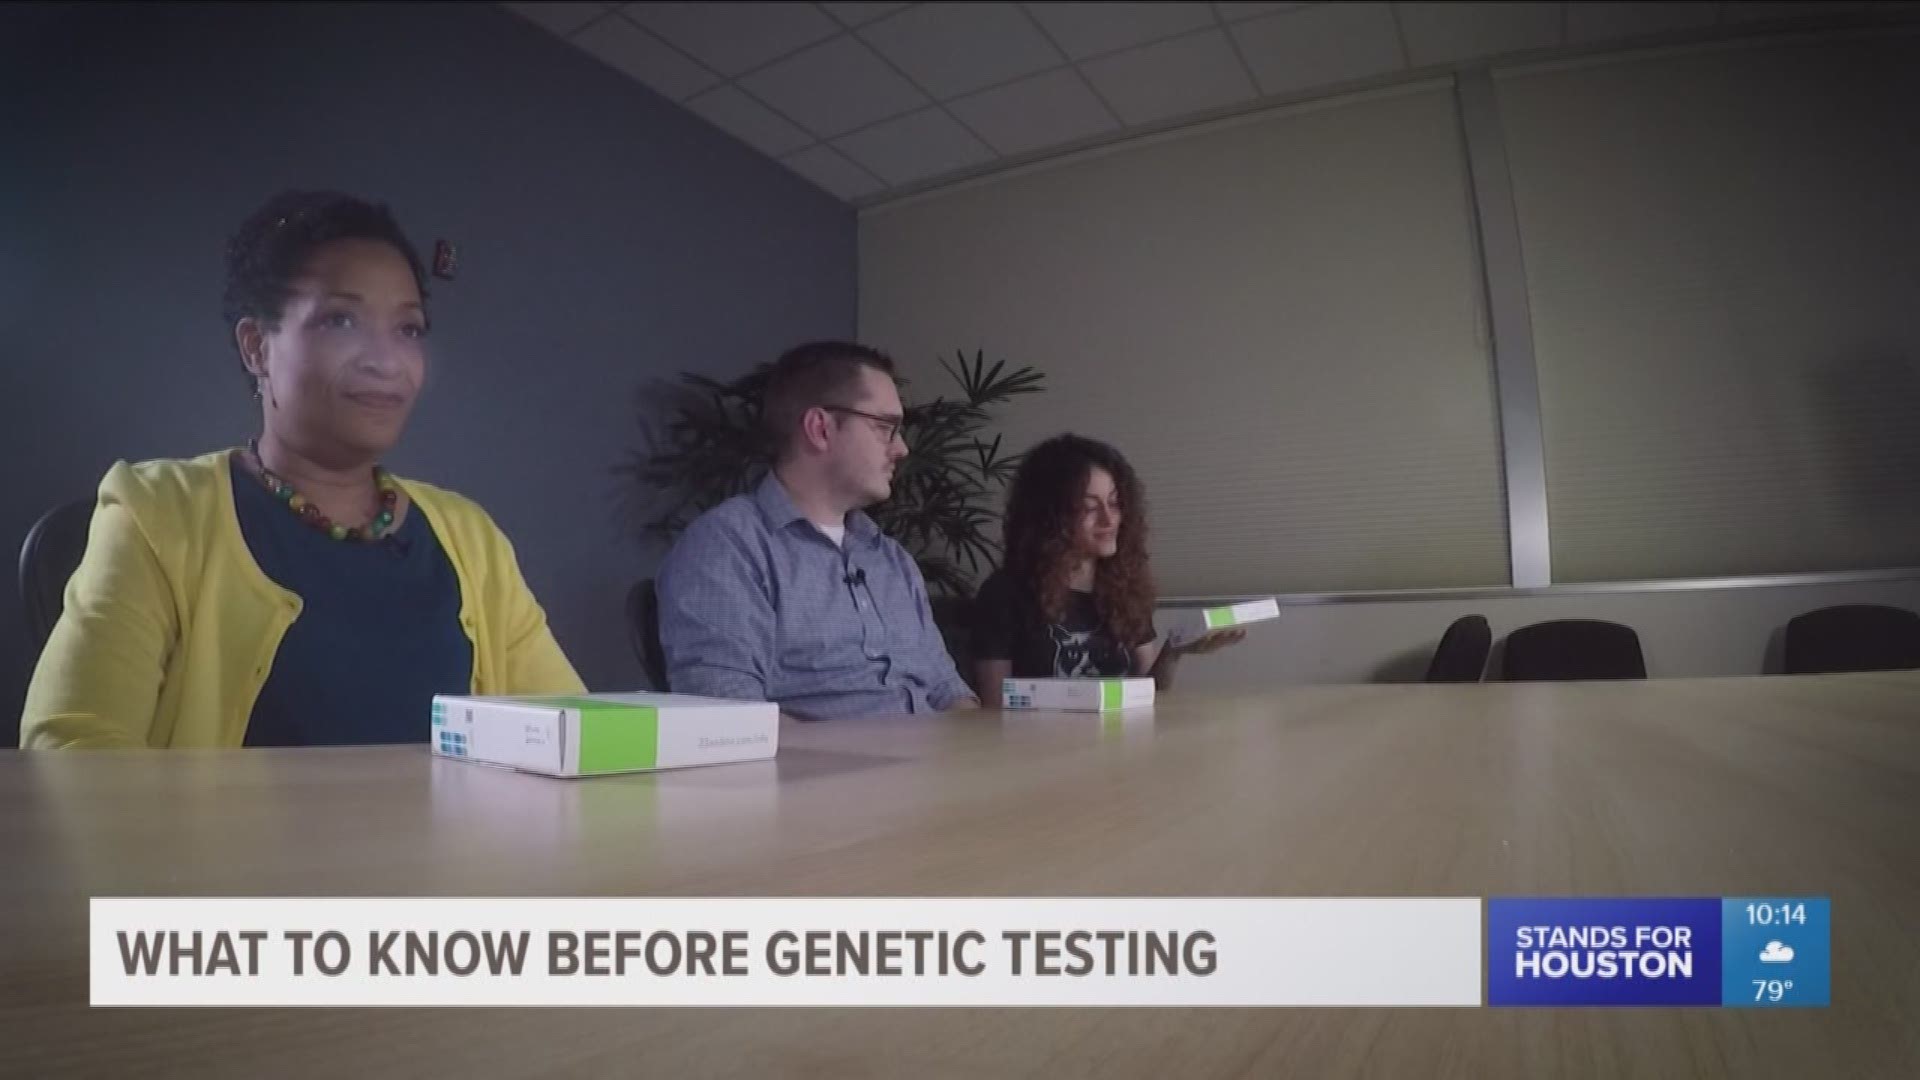 Ever wonder how the home DNA tests work and if they are worth your time and money? We decided to find out for you.